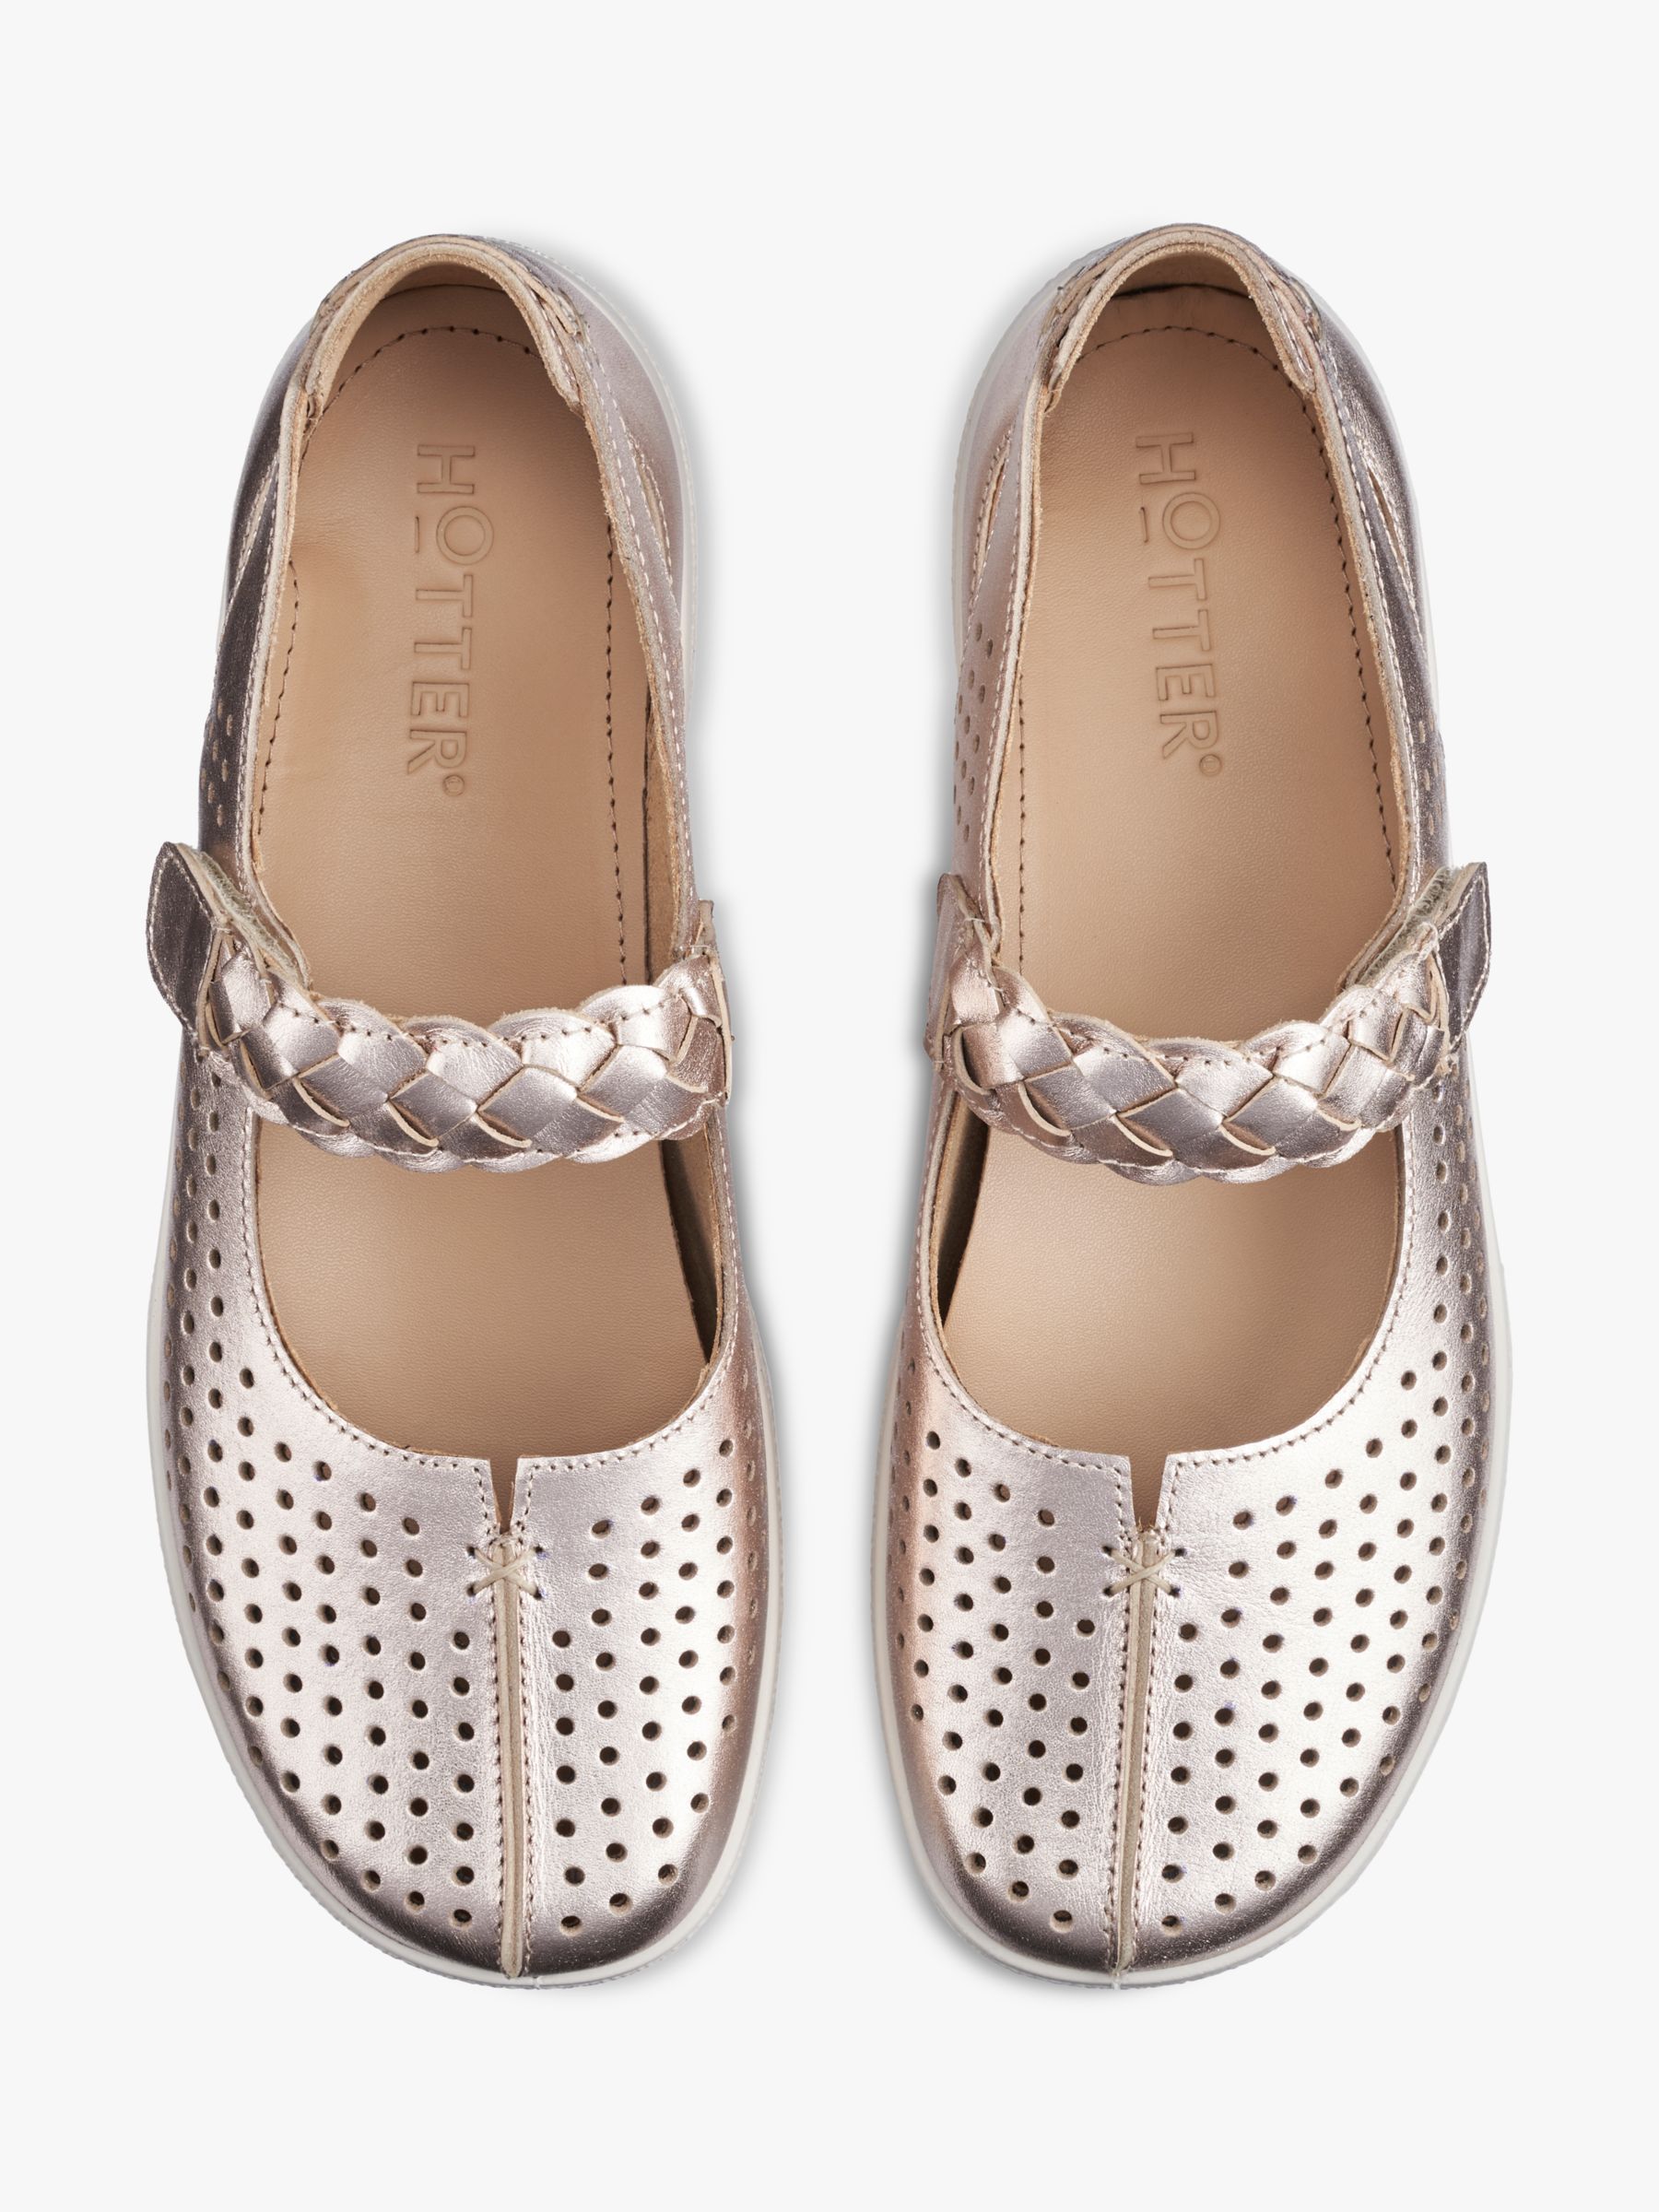 Buy Hotter Quake II Perforated Leather Mary Jane Shoes, Soft Gold Online at johnlewis.com